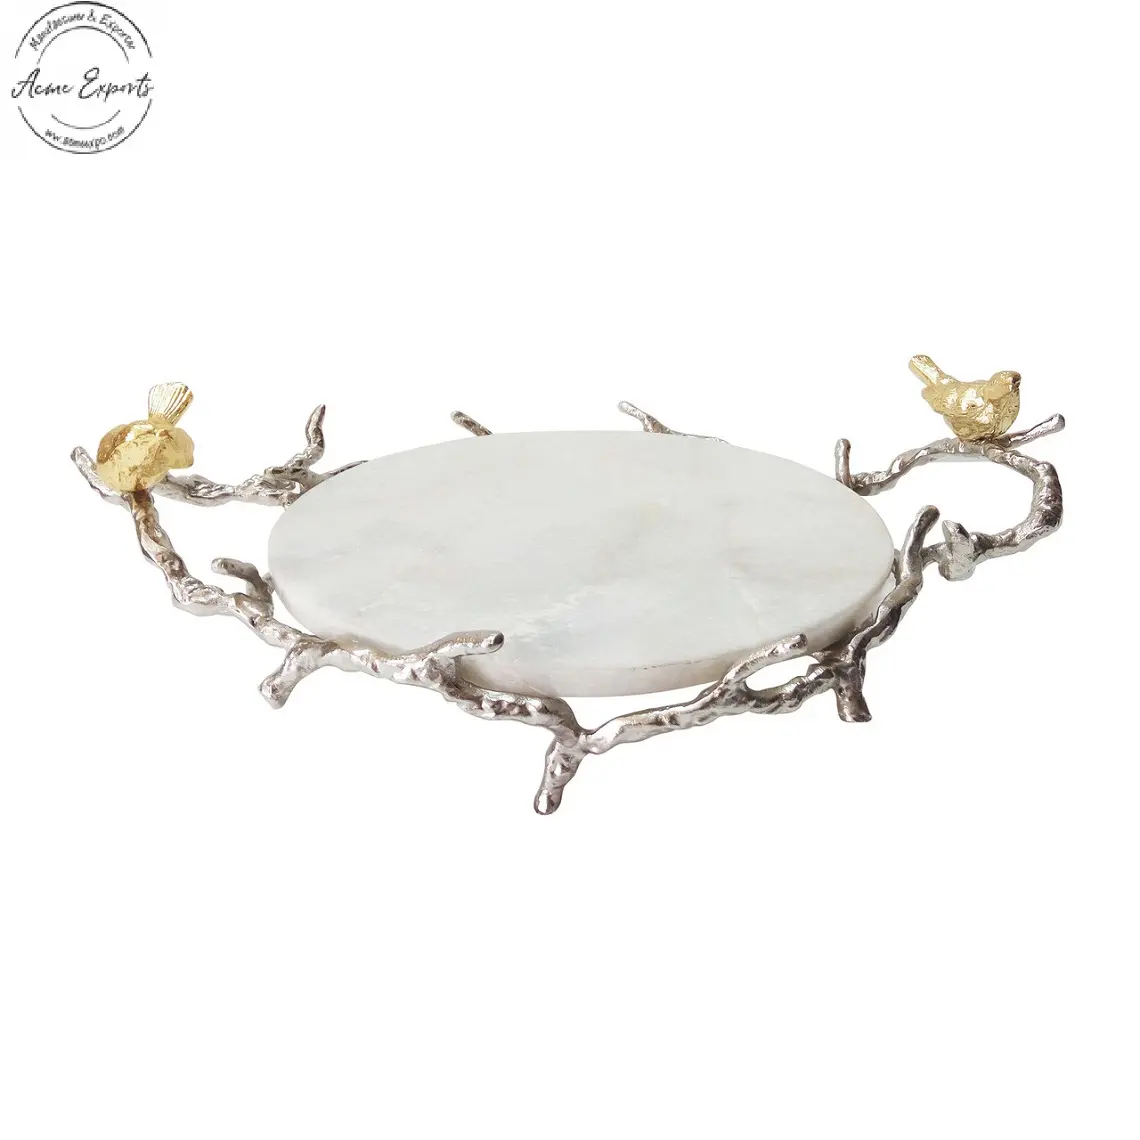 Luxury Handmade Marble Round Branch Design Handles and Stand Tray With Shiny Nickel Finished Used for Home Decoration Table Top